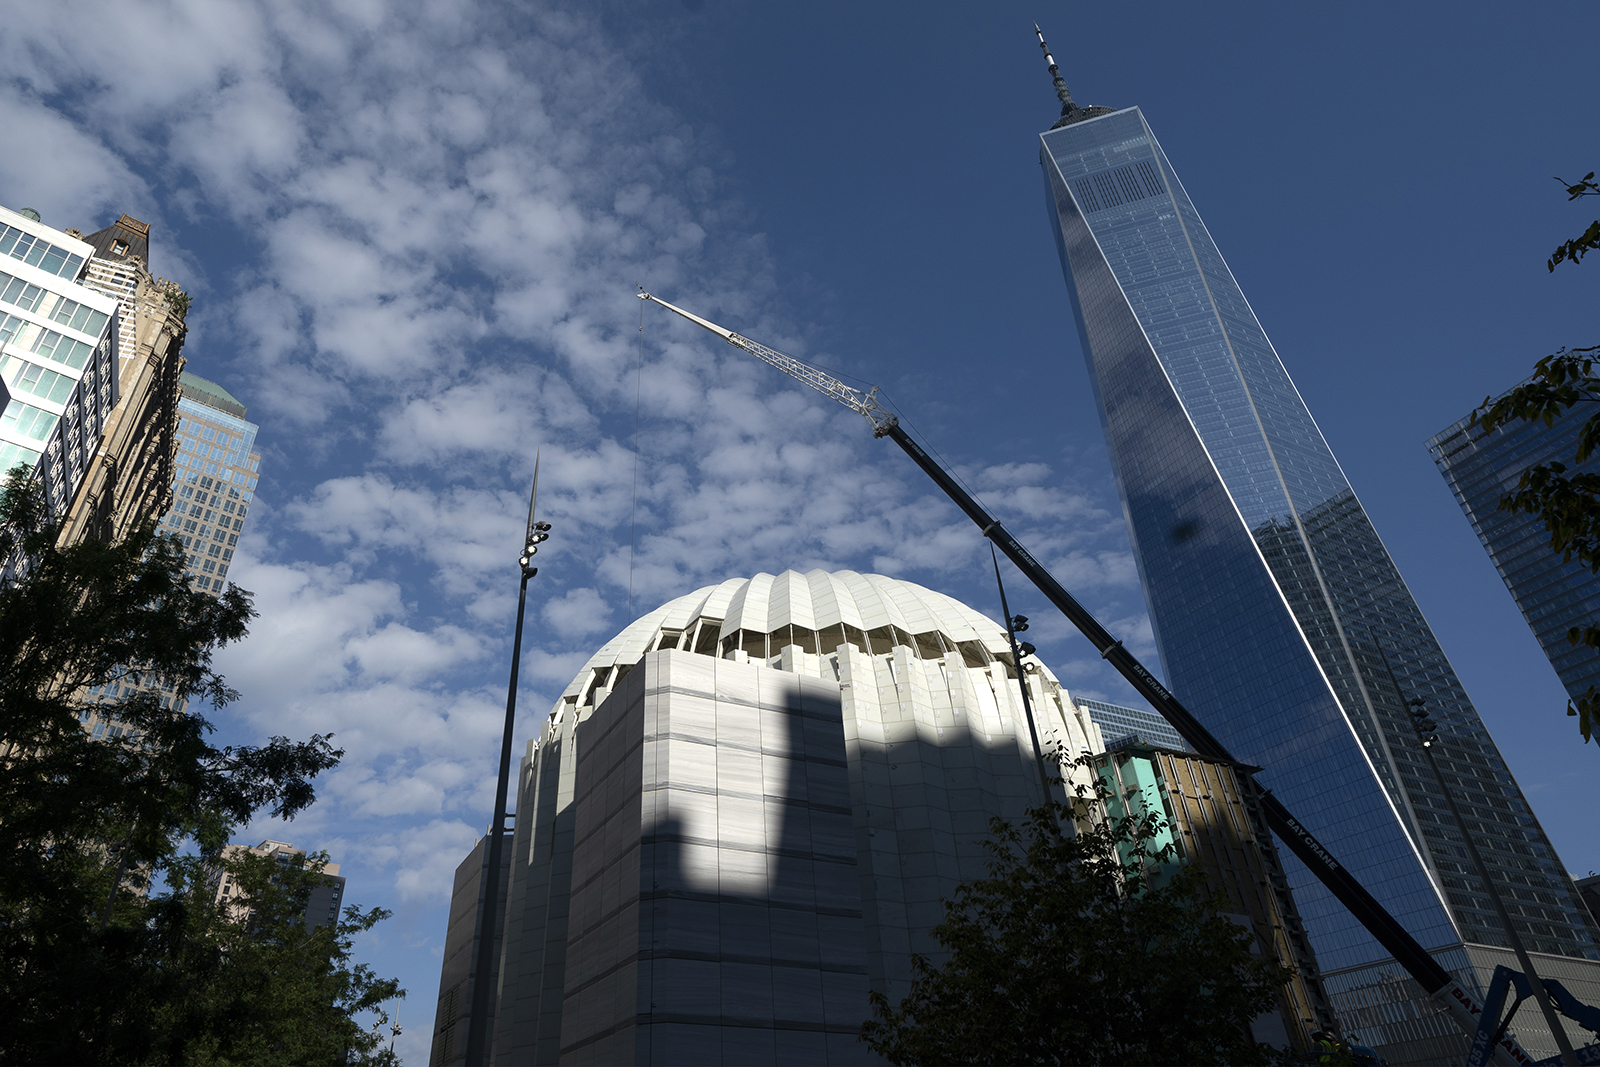 The St. Nicholas Greek Orthodox Church and National Shrine, center, is nearing completion, Wednesday, Sept. 8, 2021, at the World Trade Center in New York. The construction of the only house of worship destroyed in the attacks of September 11, 2001, is now proceeding briskly after years of delays. (AP Photo/Mark Lennihan)